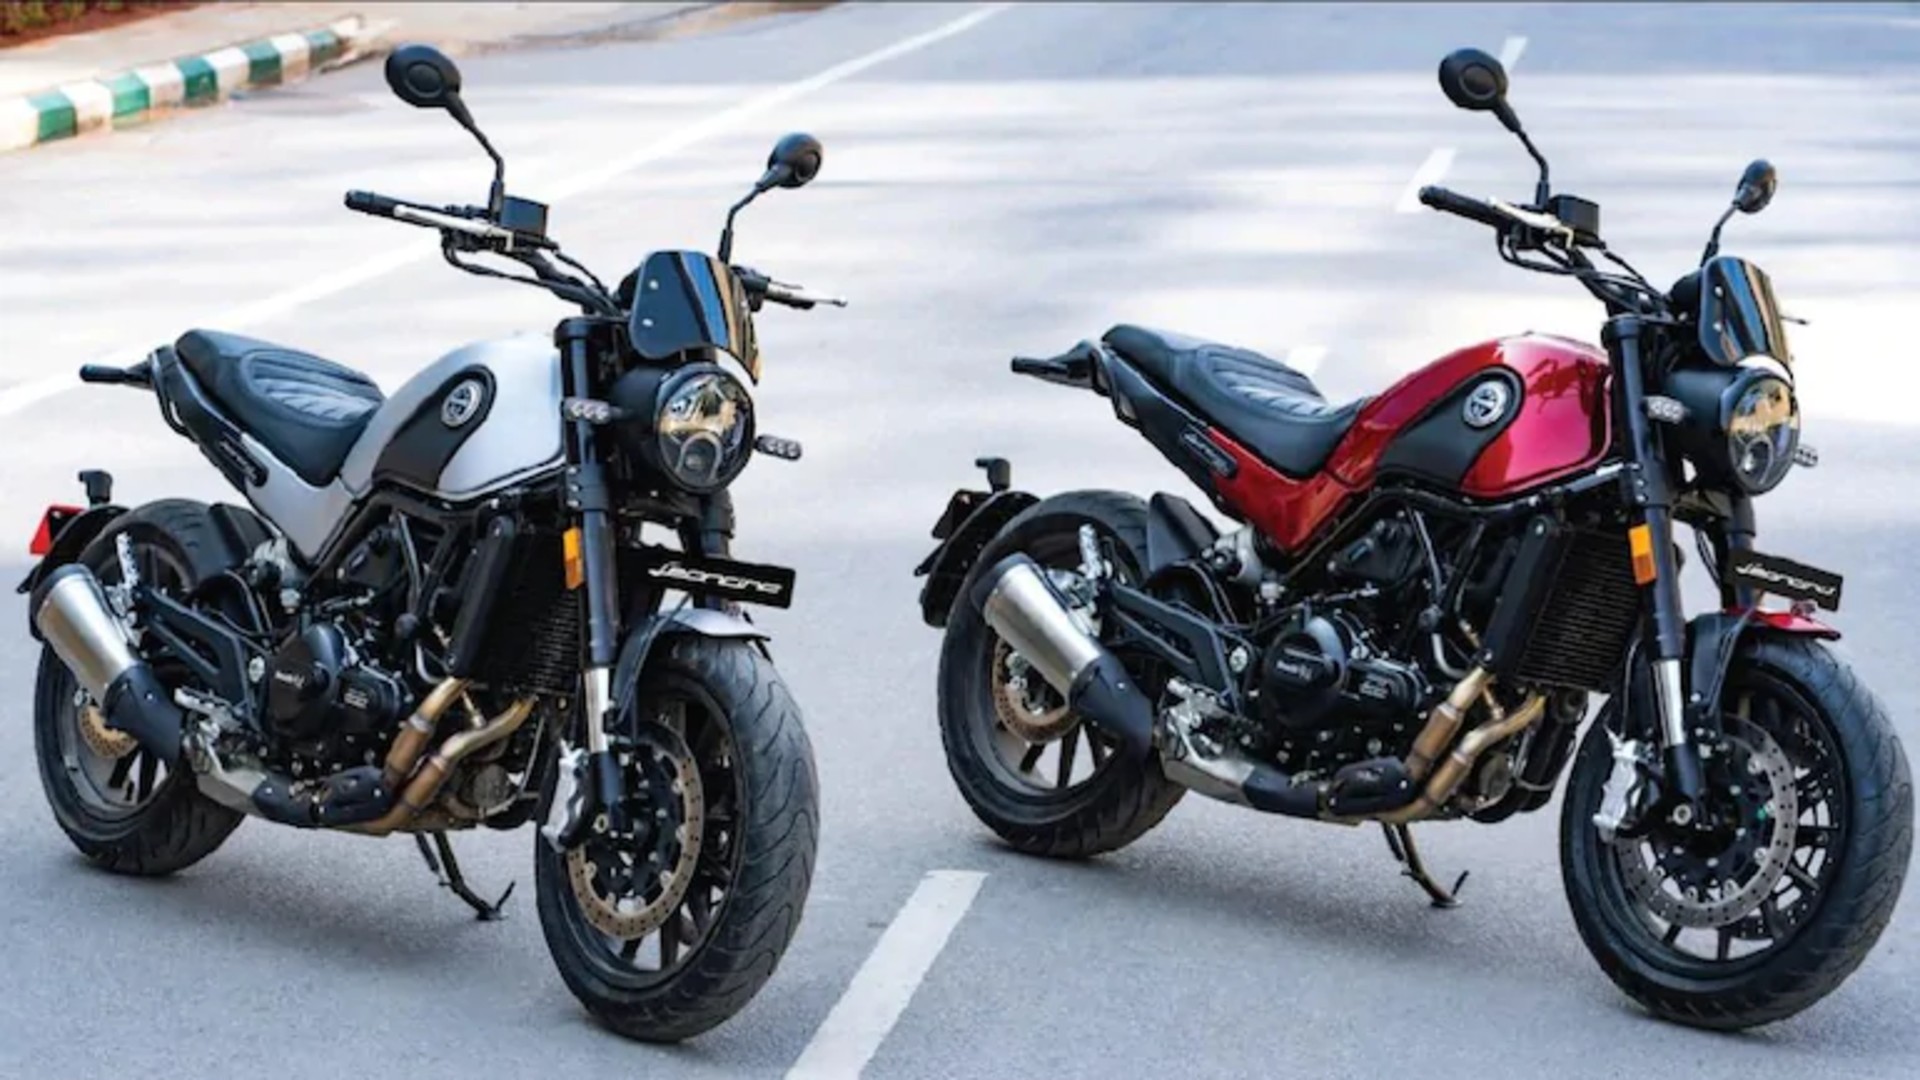 2021 Benelli Leoncino 500 BS6 Launched